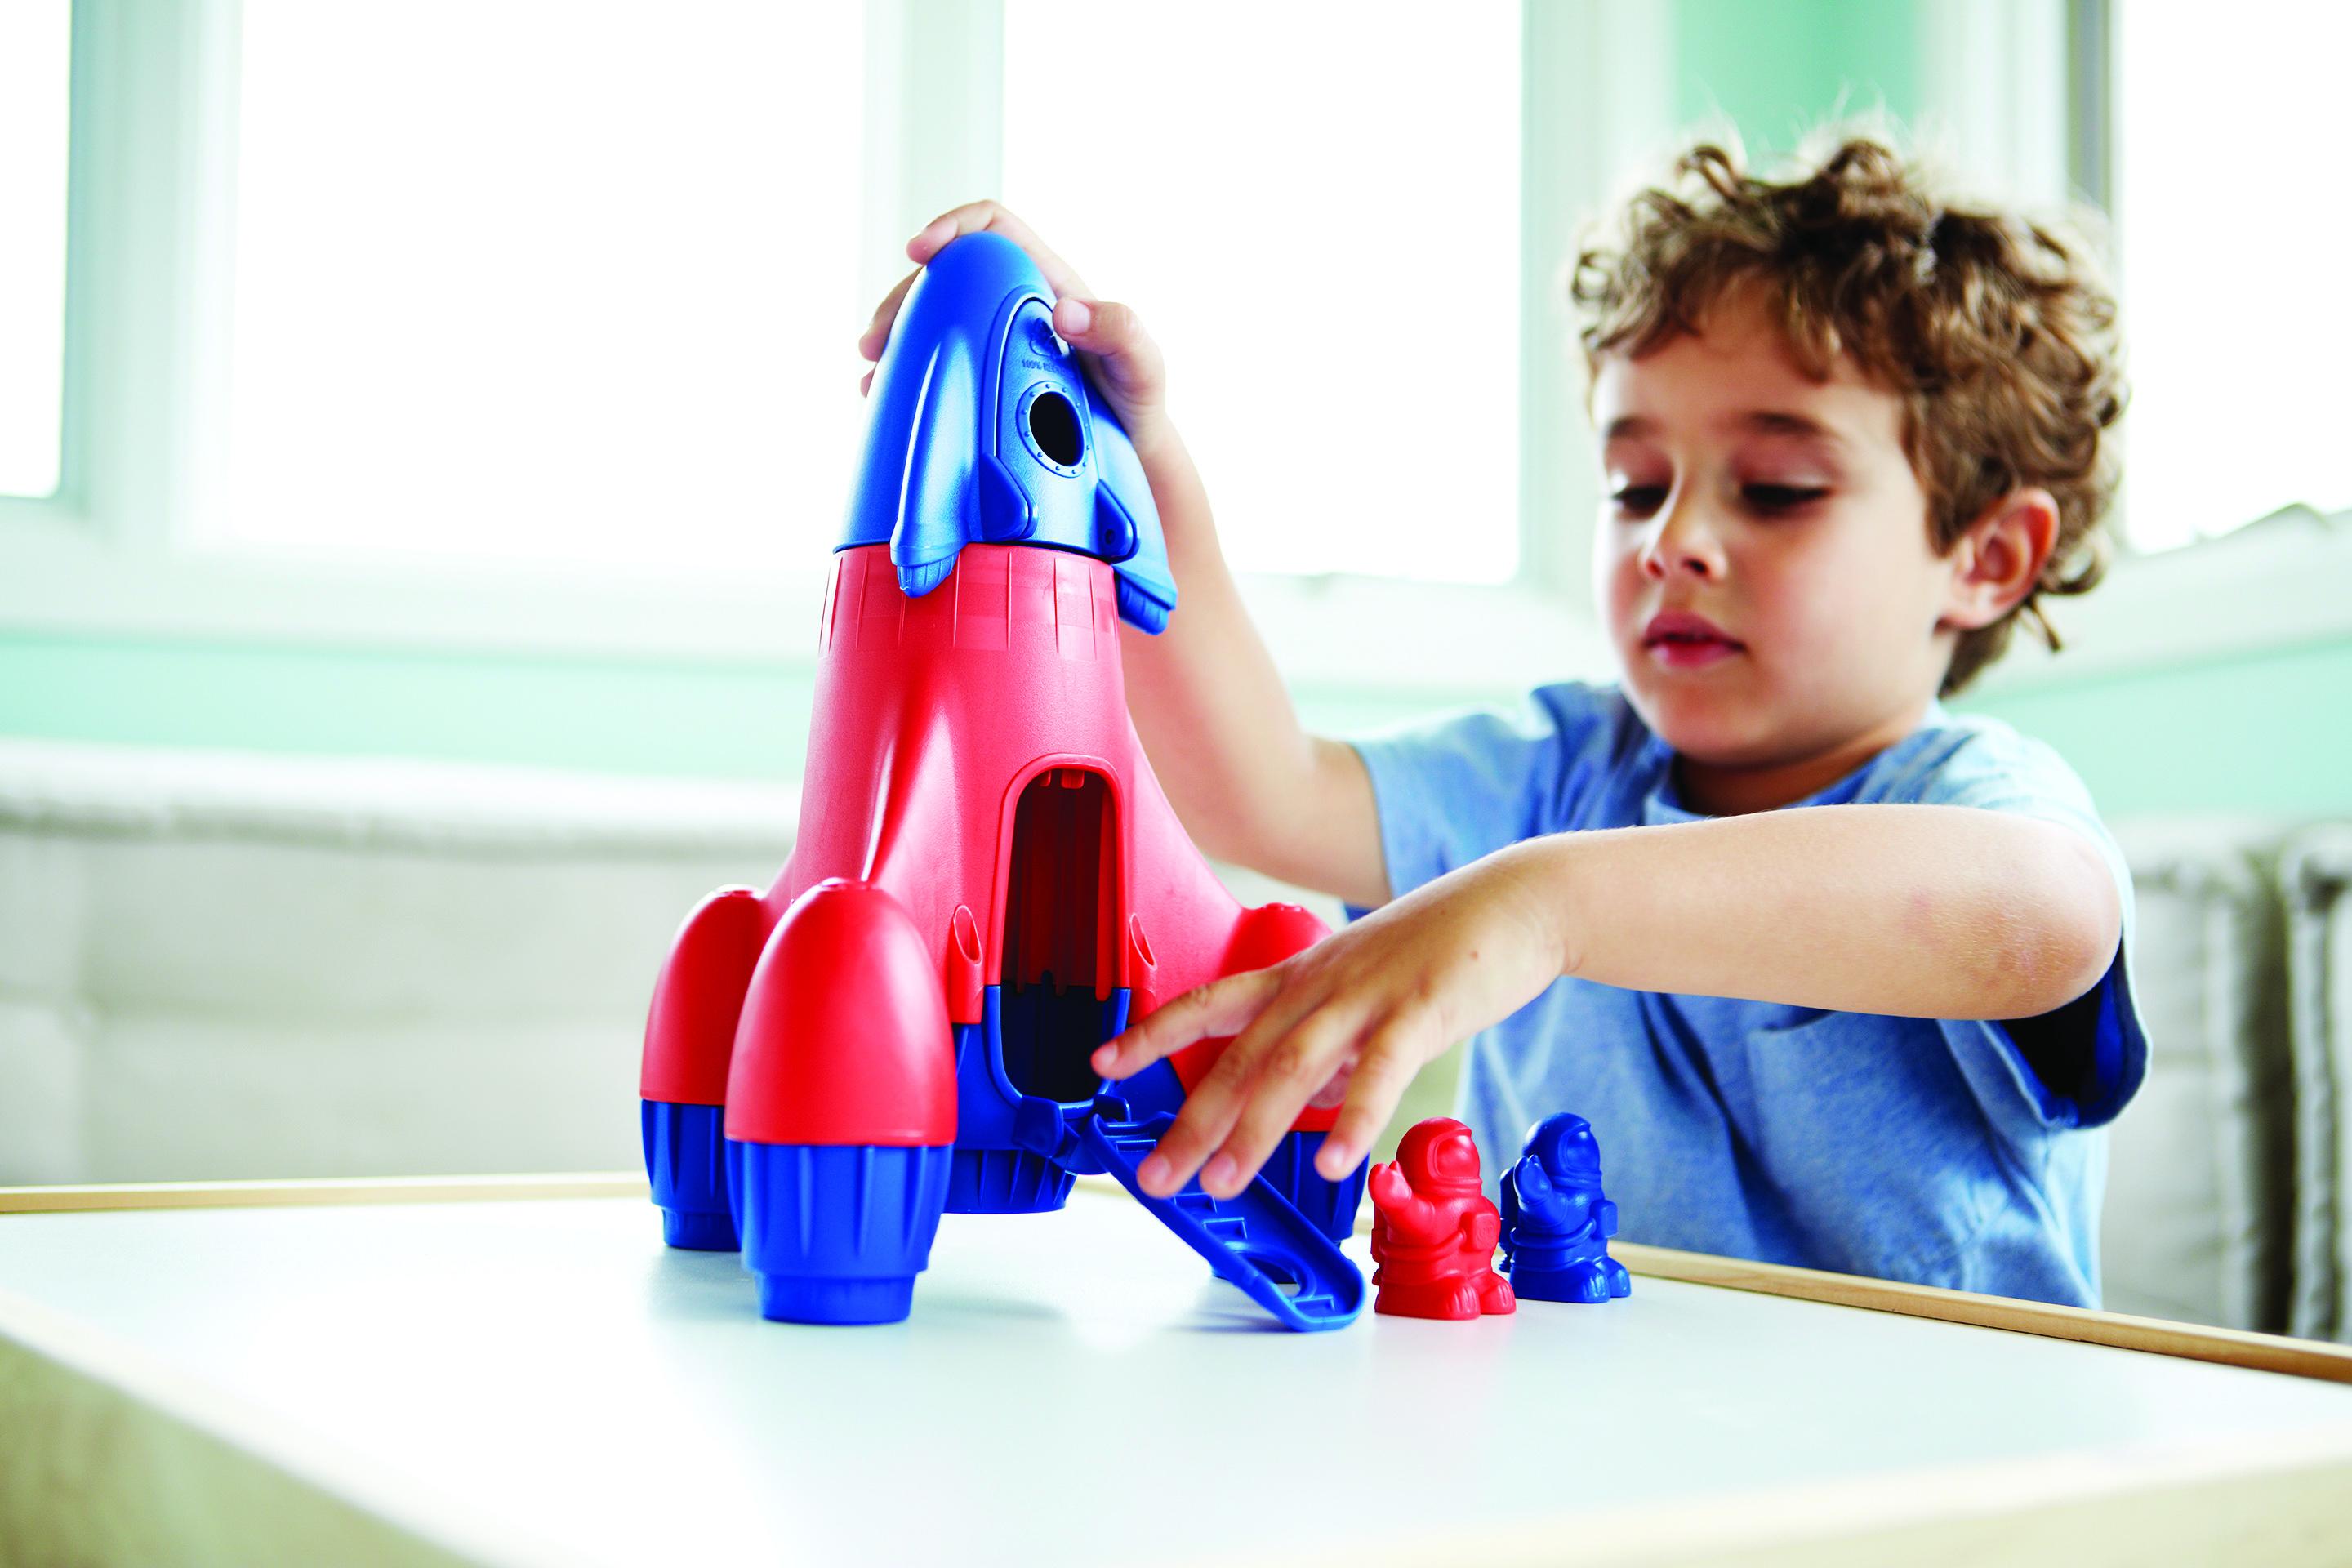 Child playing with red and blue rocket and figures.